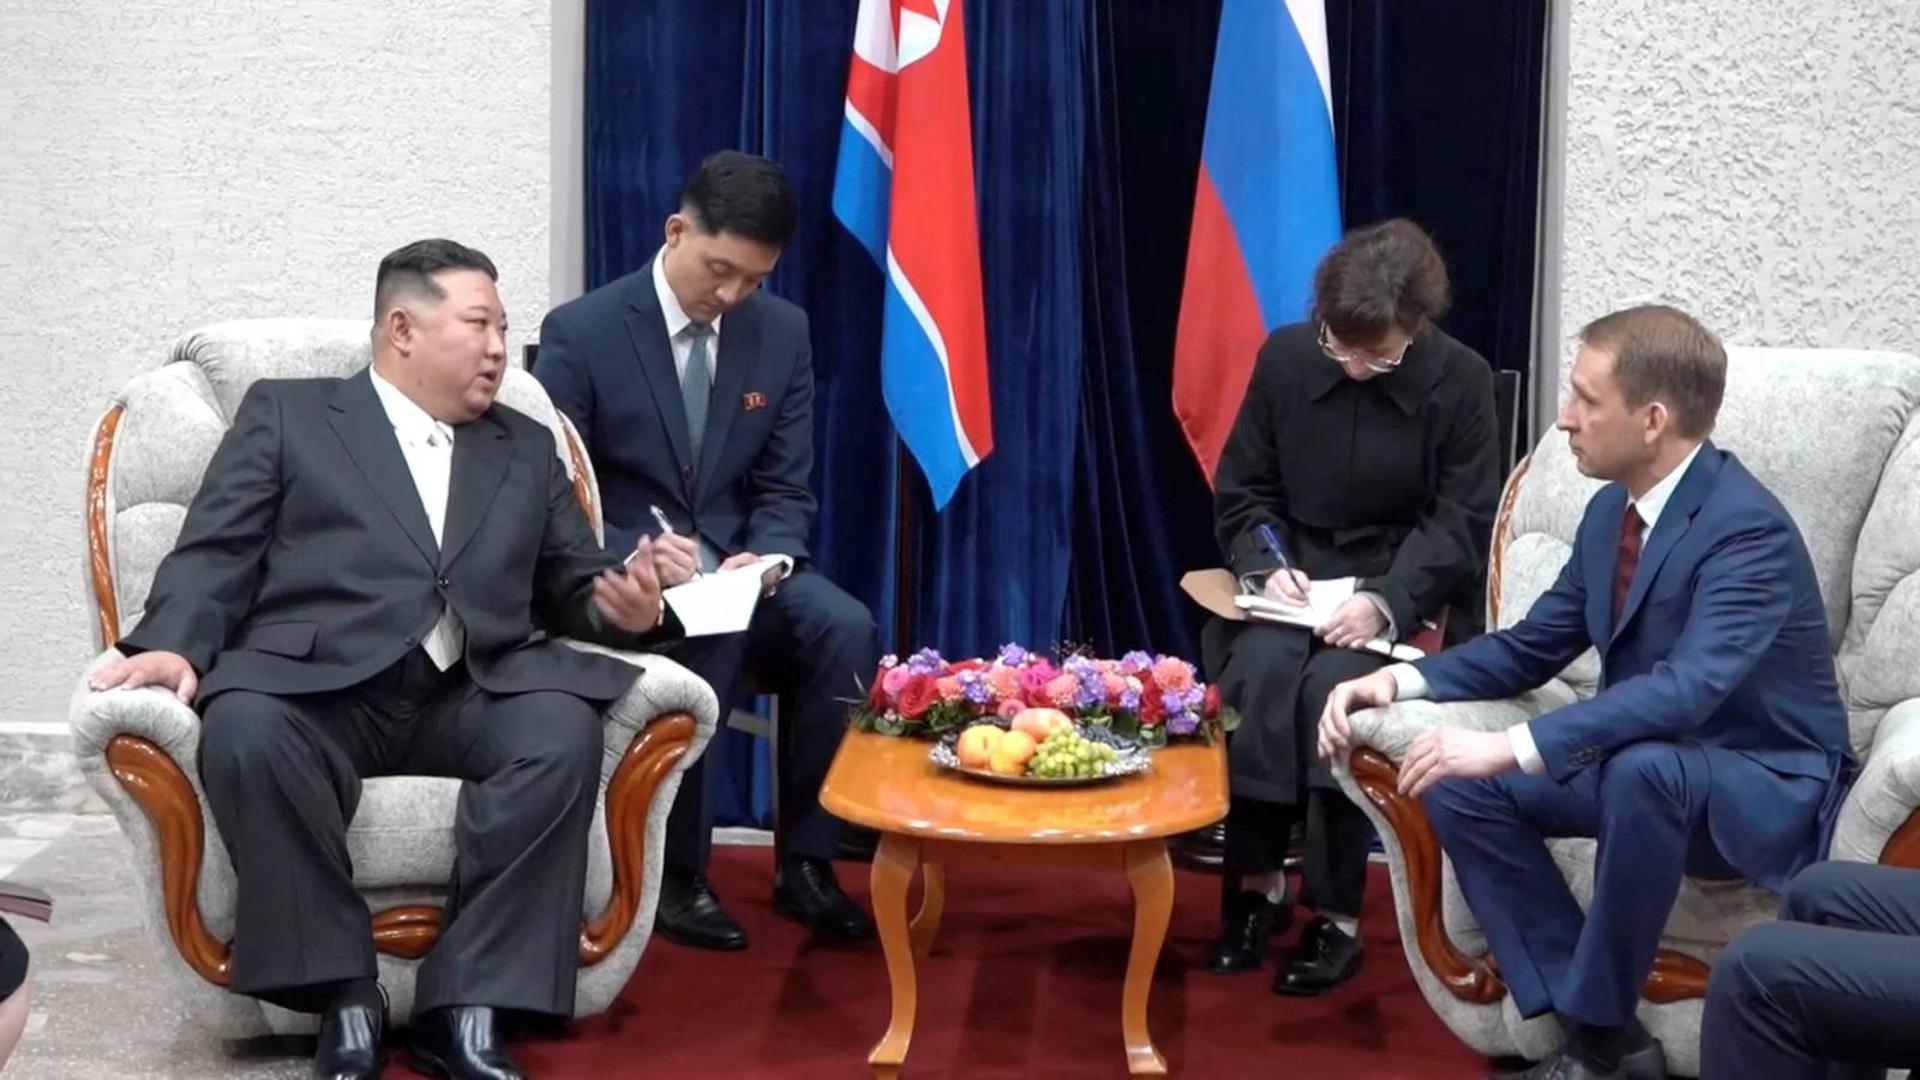 A view shows North Korean leader Kim Jong Un during a meeting with Russian Minister of Natural Resources and Environment Alexander Kozlov upon his arrival in Khasan in the Primorsky region, Russia, in this still image from video published September 12, 2023. Courtesy Governor of Russia's Primorsky Krai Oleg Kozhemyako Telegram Channel via REUTERS ATTENTION EDITORS - THIS IMAGE WAS PROVIDED BY A THIRD PARTY. NO RESALES. NO ARCHIVES. MANDATORY CREDIT. Photo: OLEG KOZHEMYAKO TELEGRAM CHANNEL/REUTERS